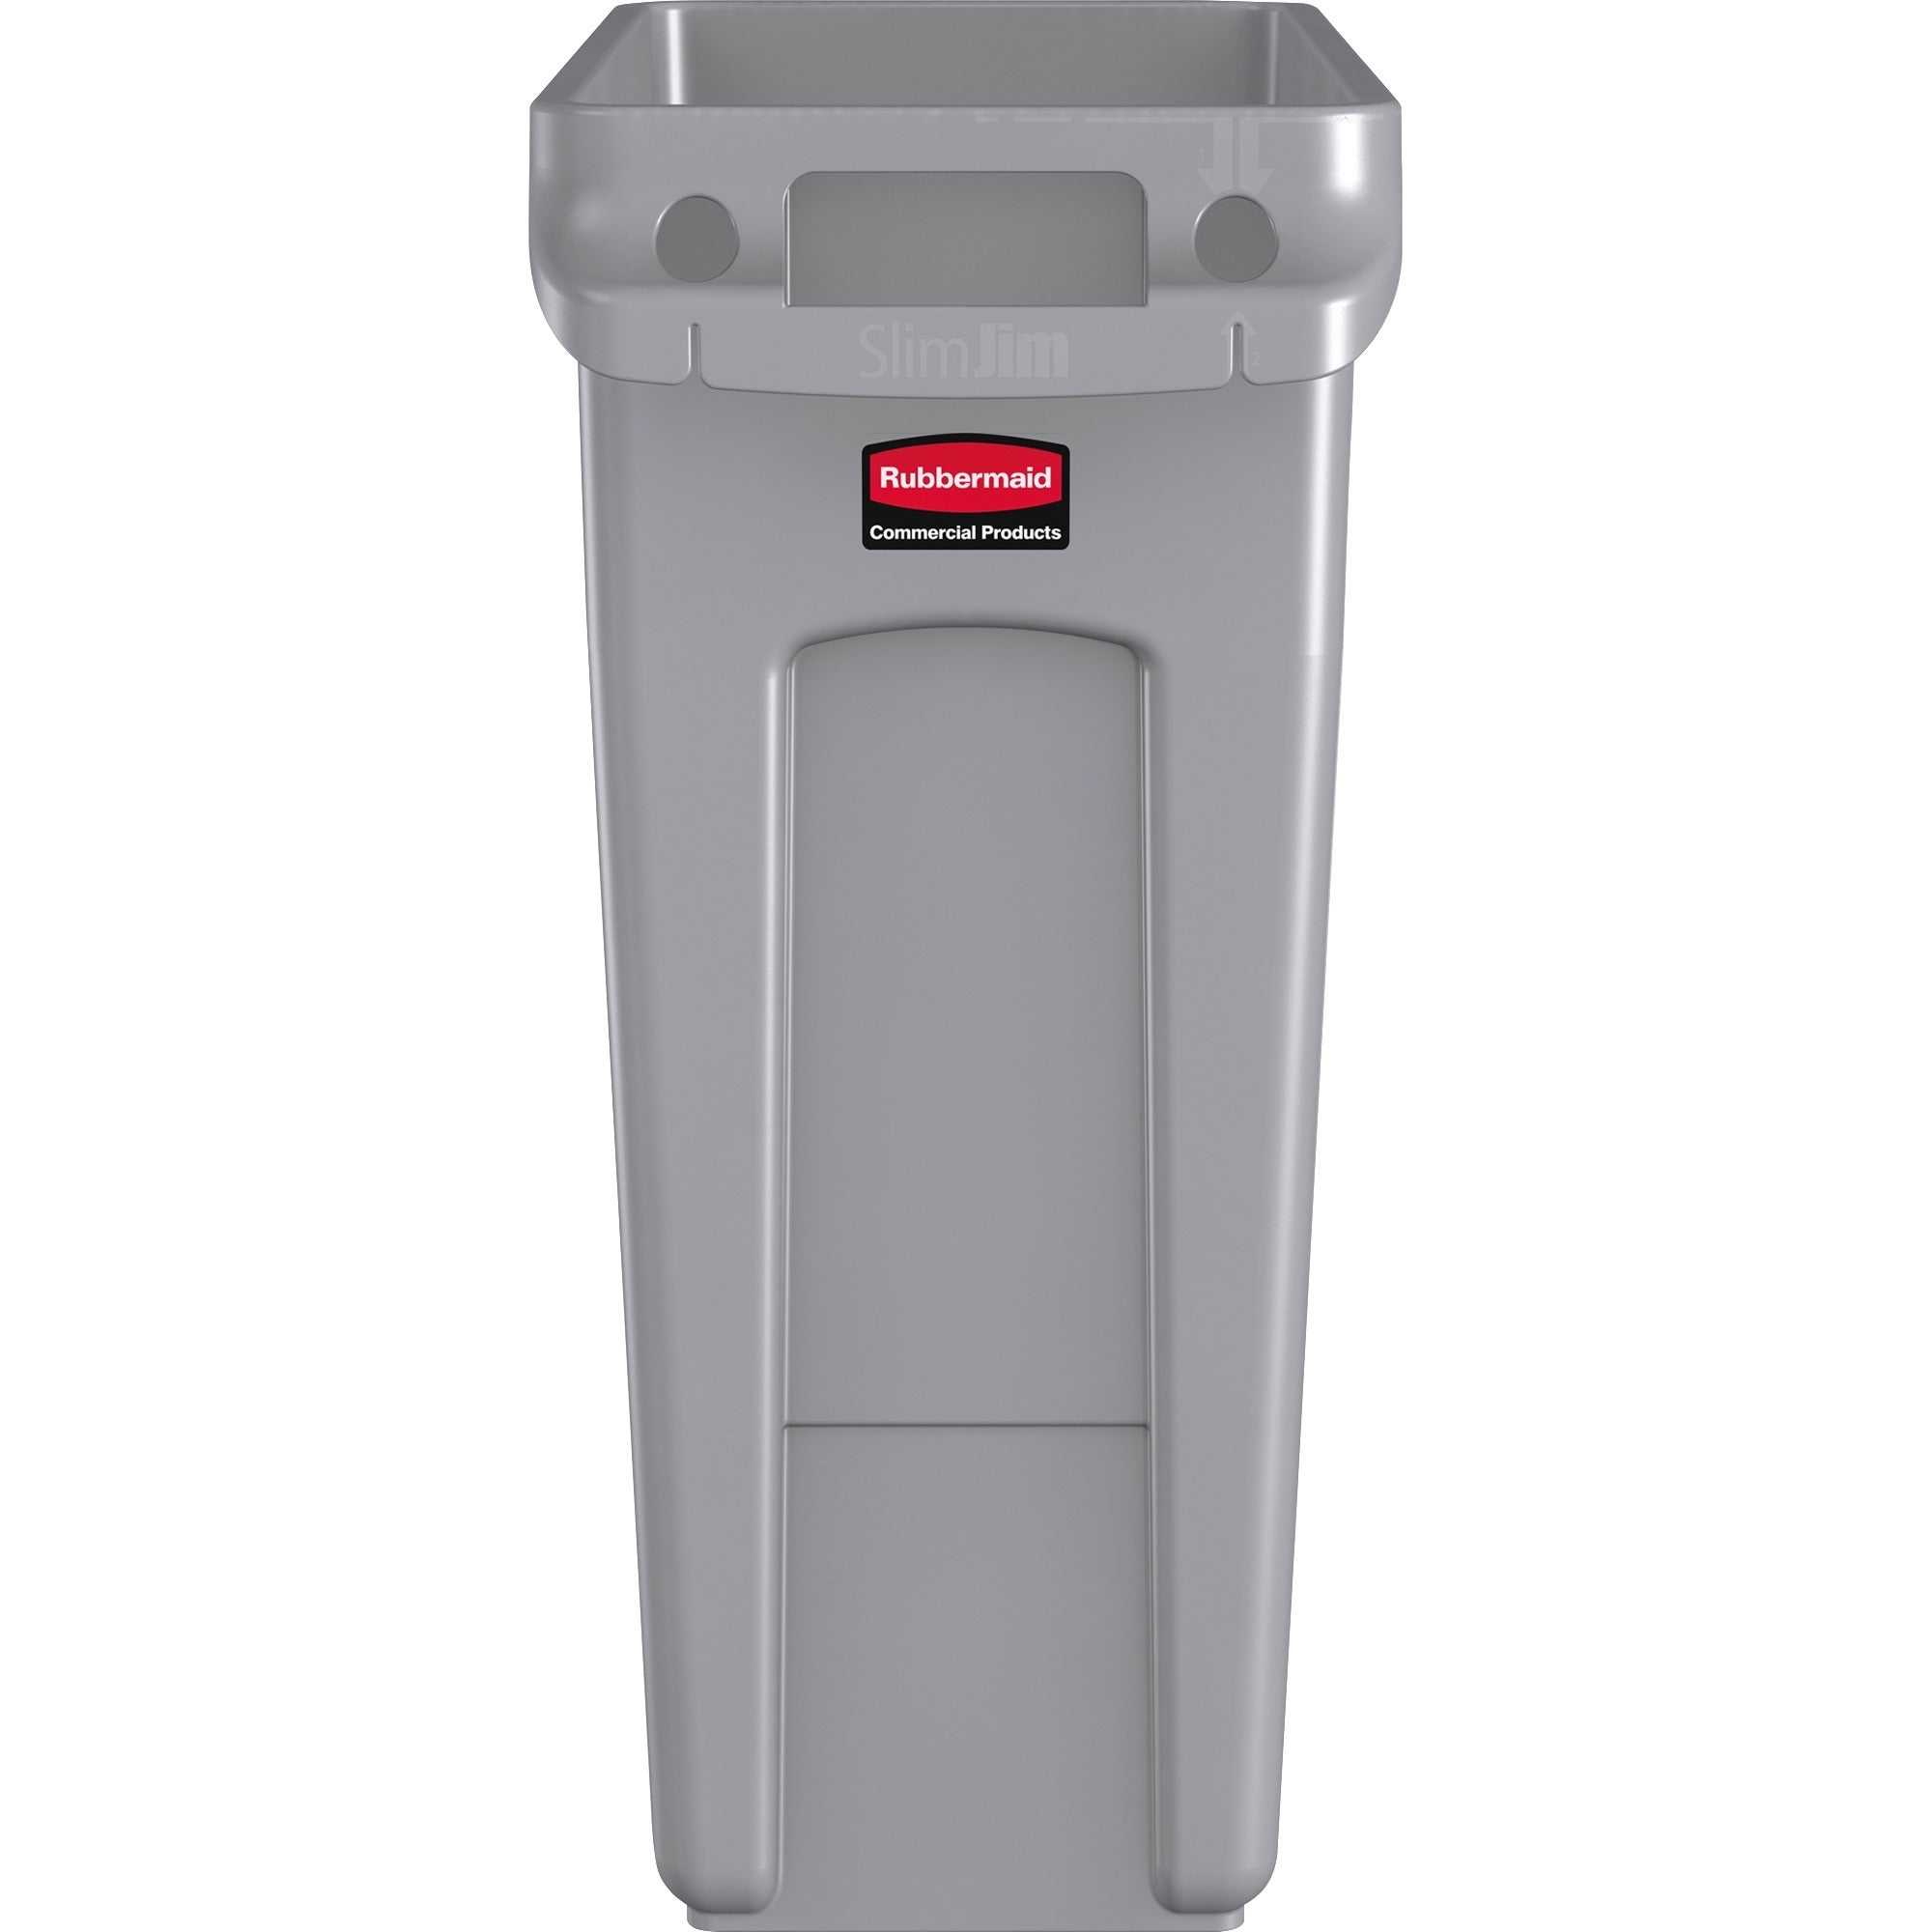 rubbermaid-commercial-slim-jim-vented-container-16-gal-capacity-rectangular-durable-vented-sturdy-weather-resistant-handle-lightweight-25-height-x-11-width-plastic-gray-4-carton_rcp1971258ct - 3